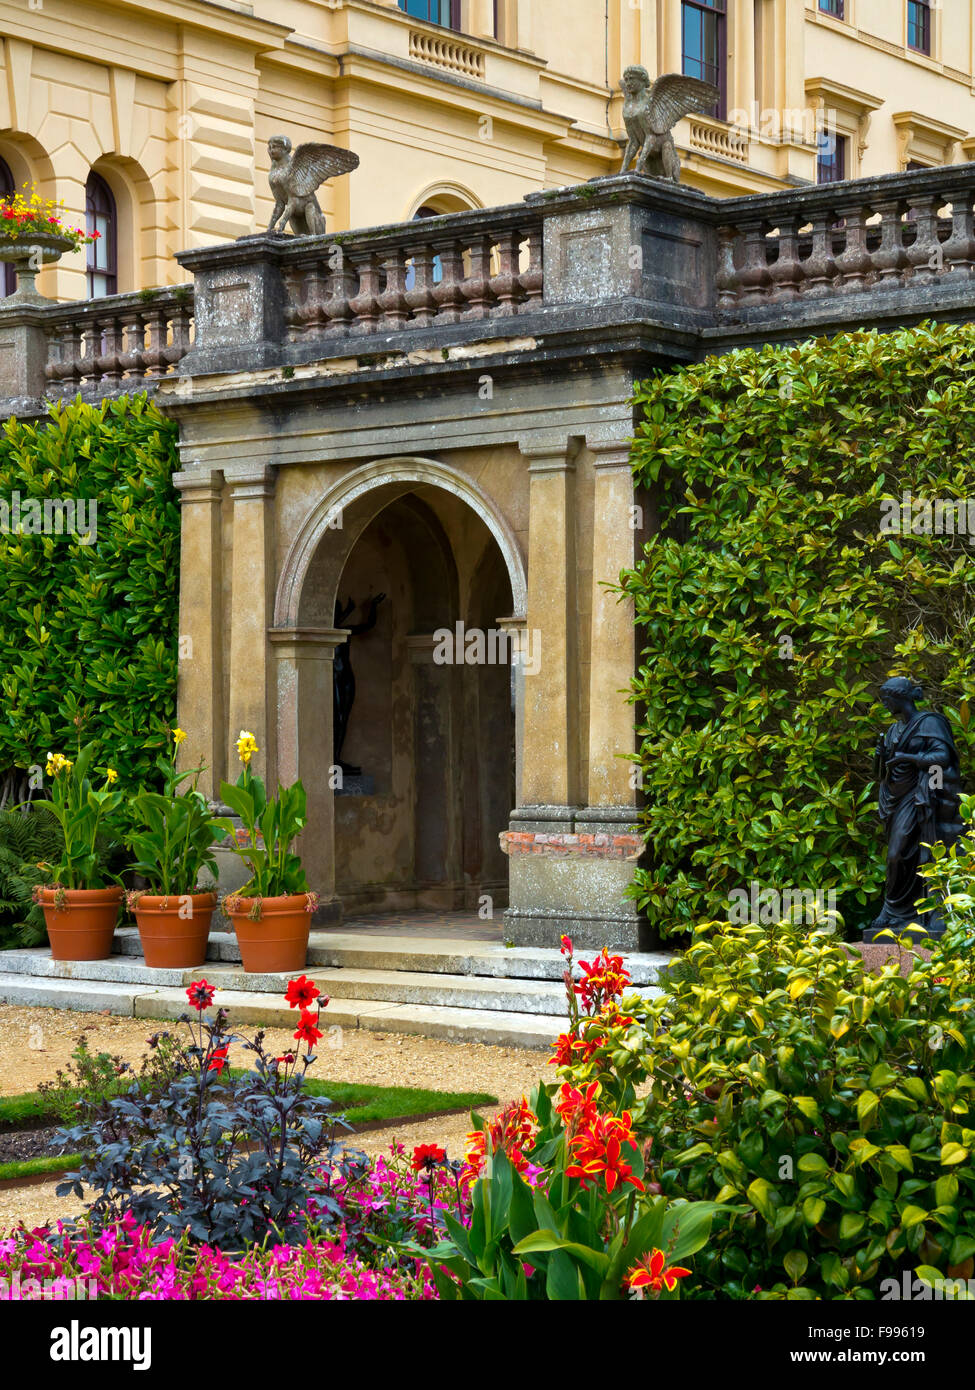 The Italian style garden at Osborne House East Cowes Isle of Wight England UK former home of Queen Victoria and Prince Albert Stock Photo